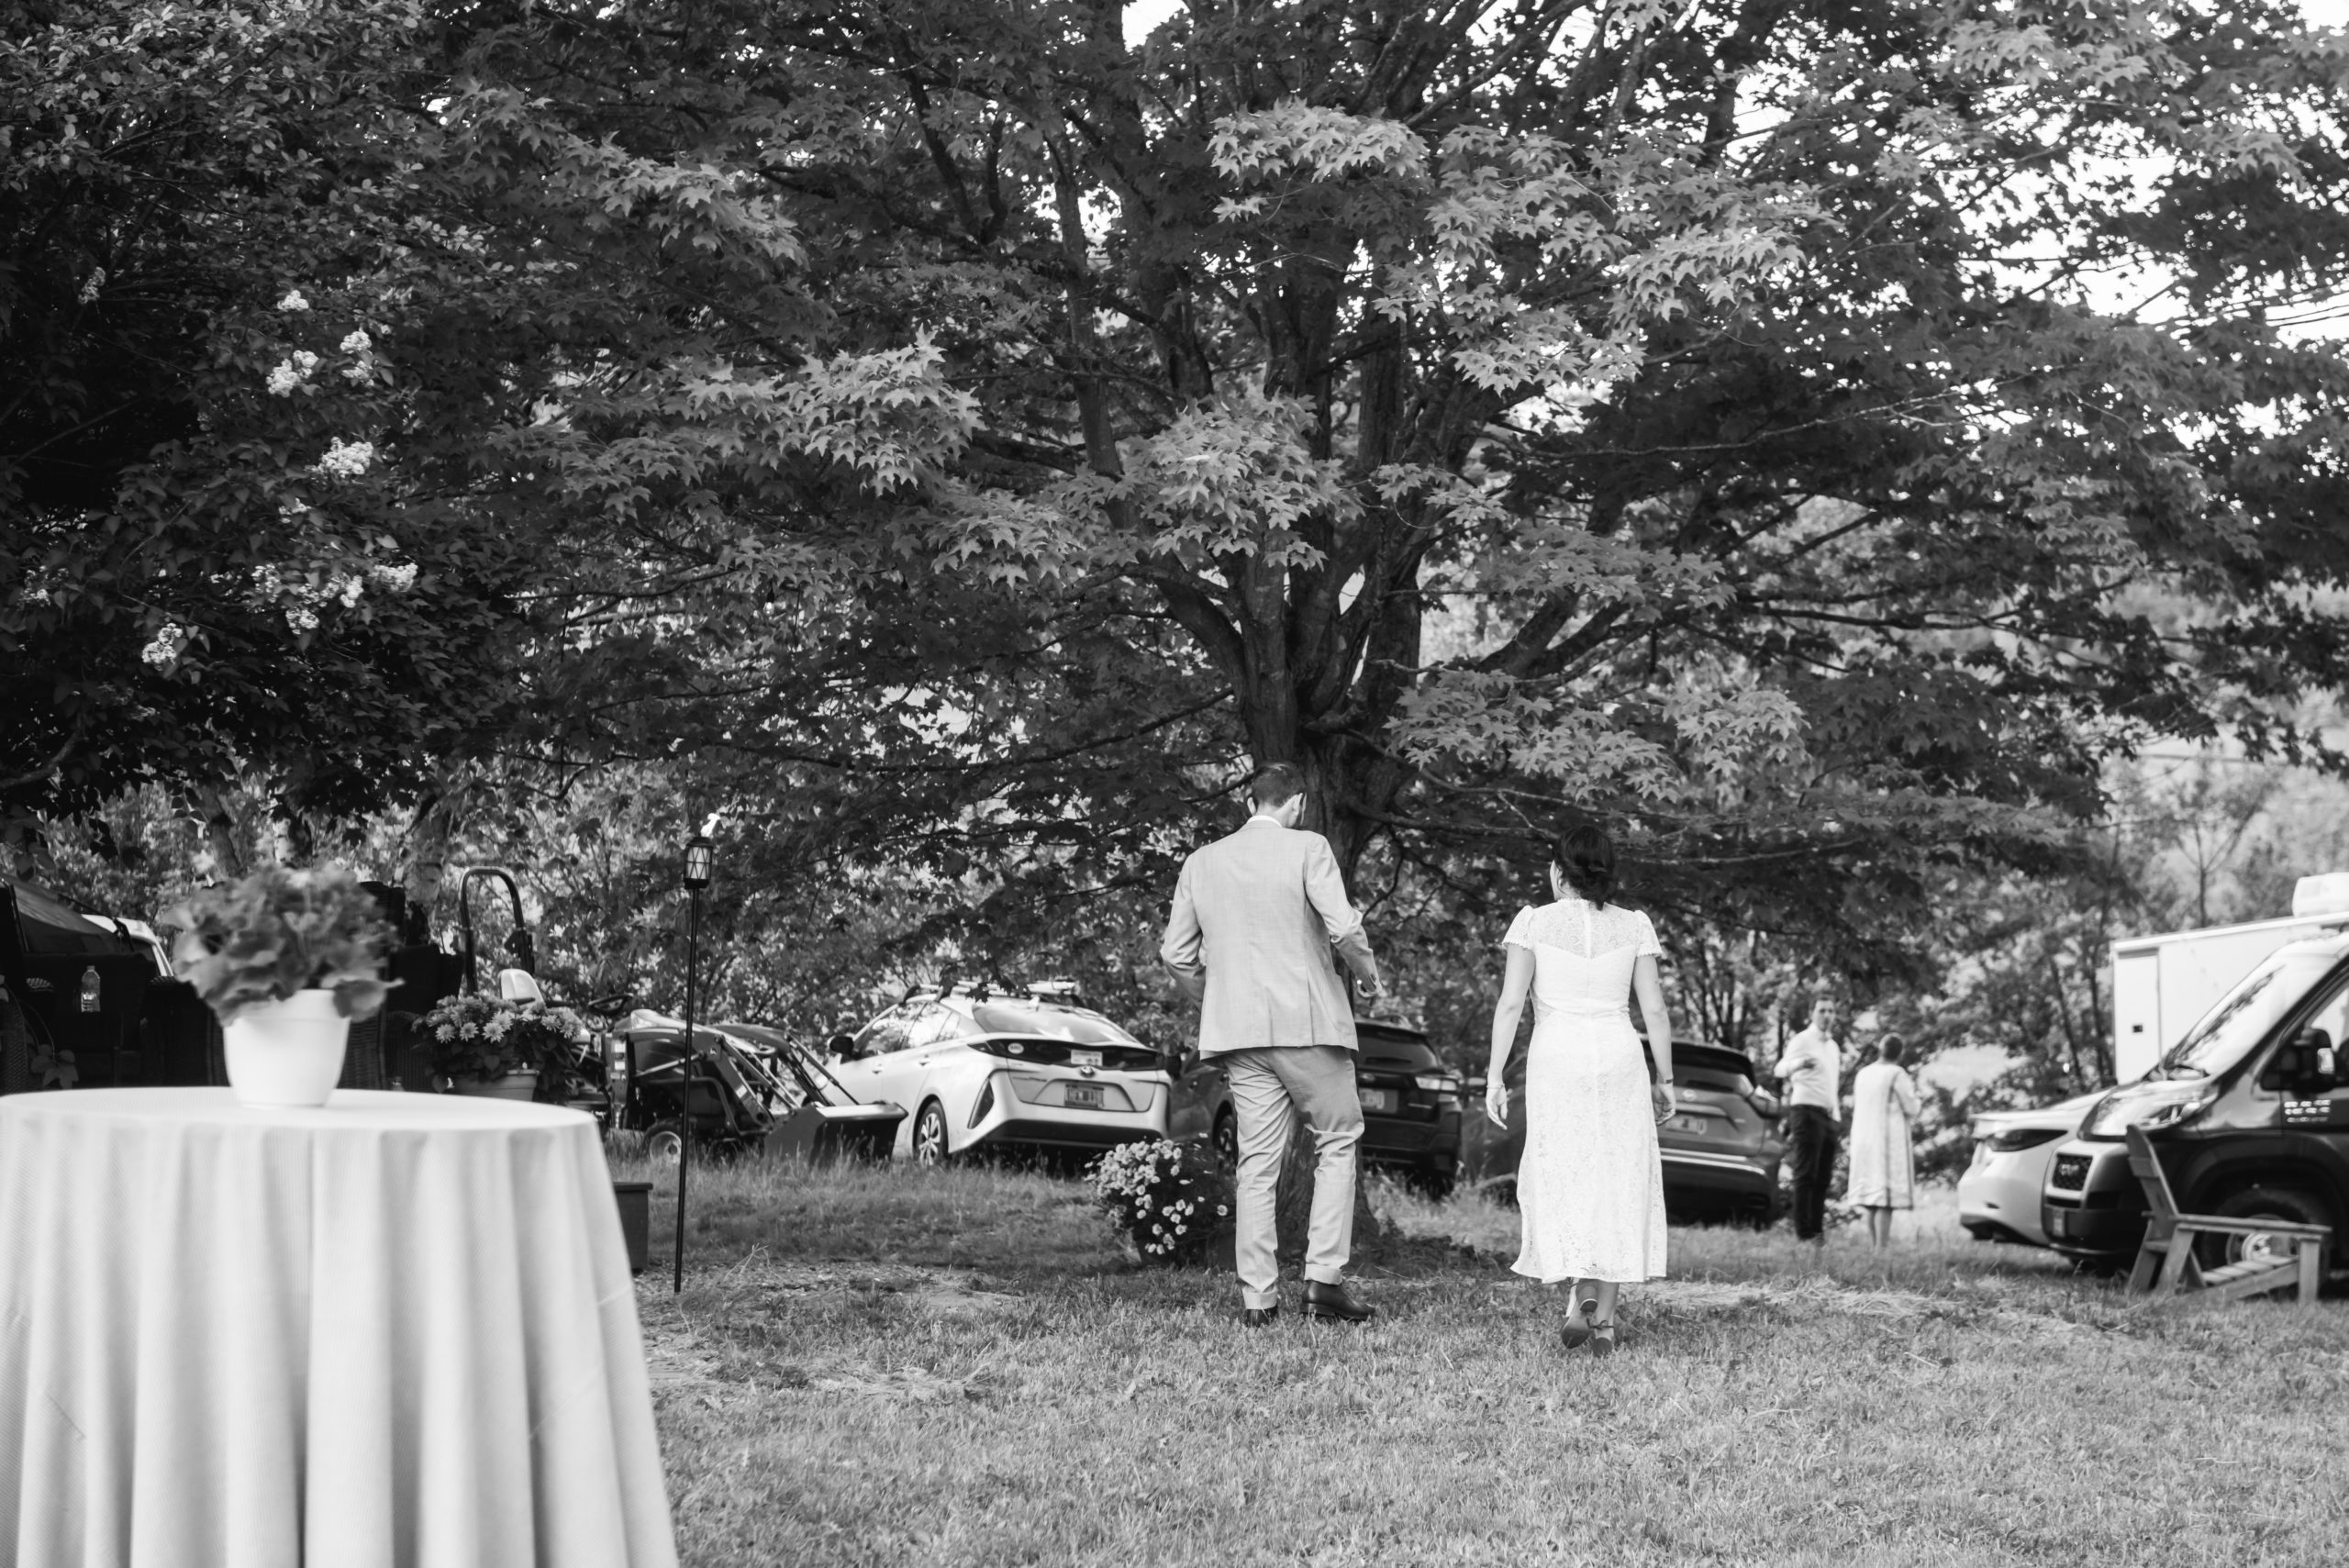 Black and white photo of the bride and groom walking away from the reception tent (not visible in the photo). They are mid-walk in grass with their backs away from the camera. There is a big tree in front of them and there are cars parked in the background.